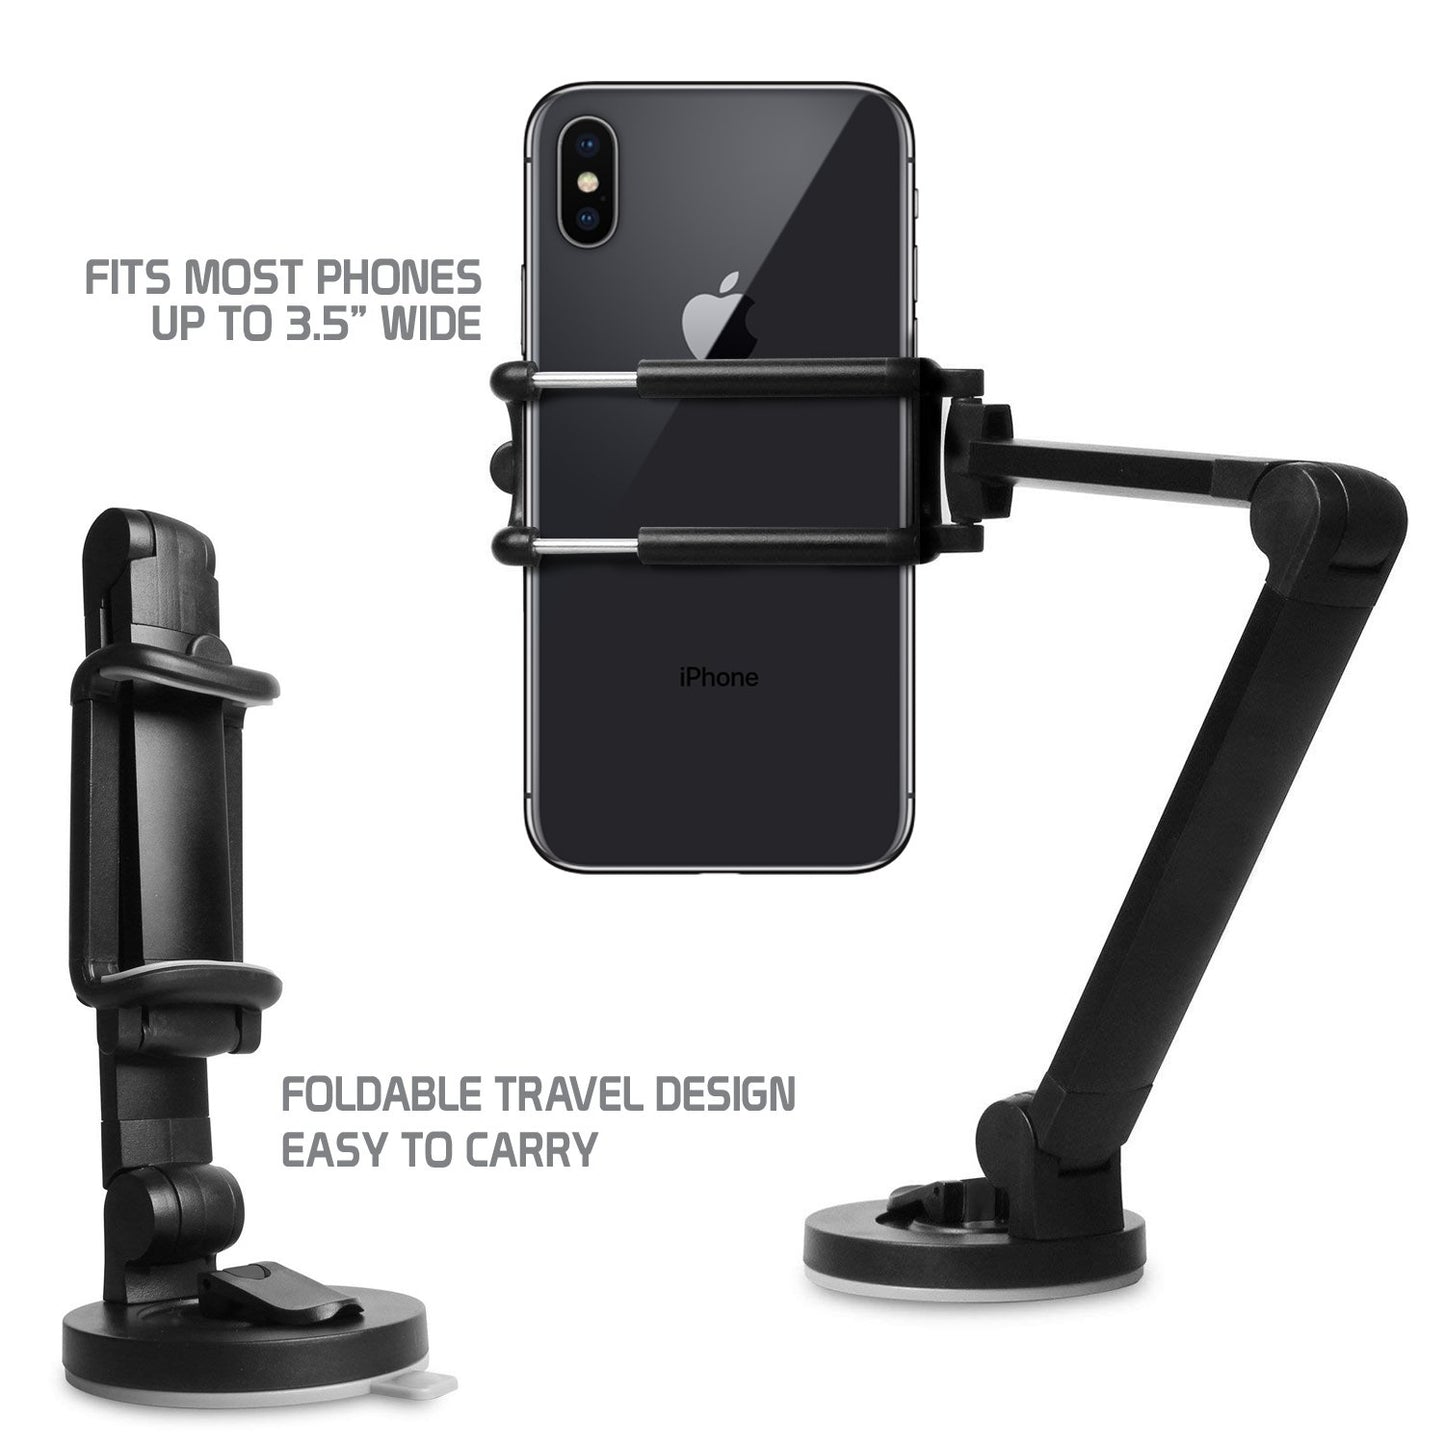 PH118EBK -  Dashboard, Windshield and Desktop Phone Mount with 360 Degree Rotation and Adjustable Folding Arms for Smartphones